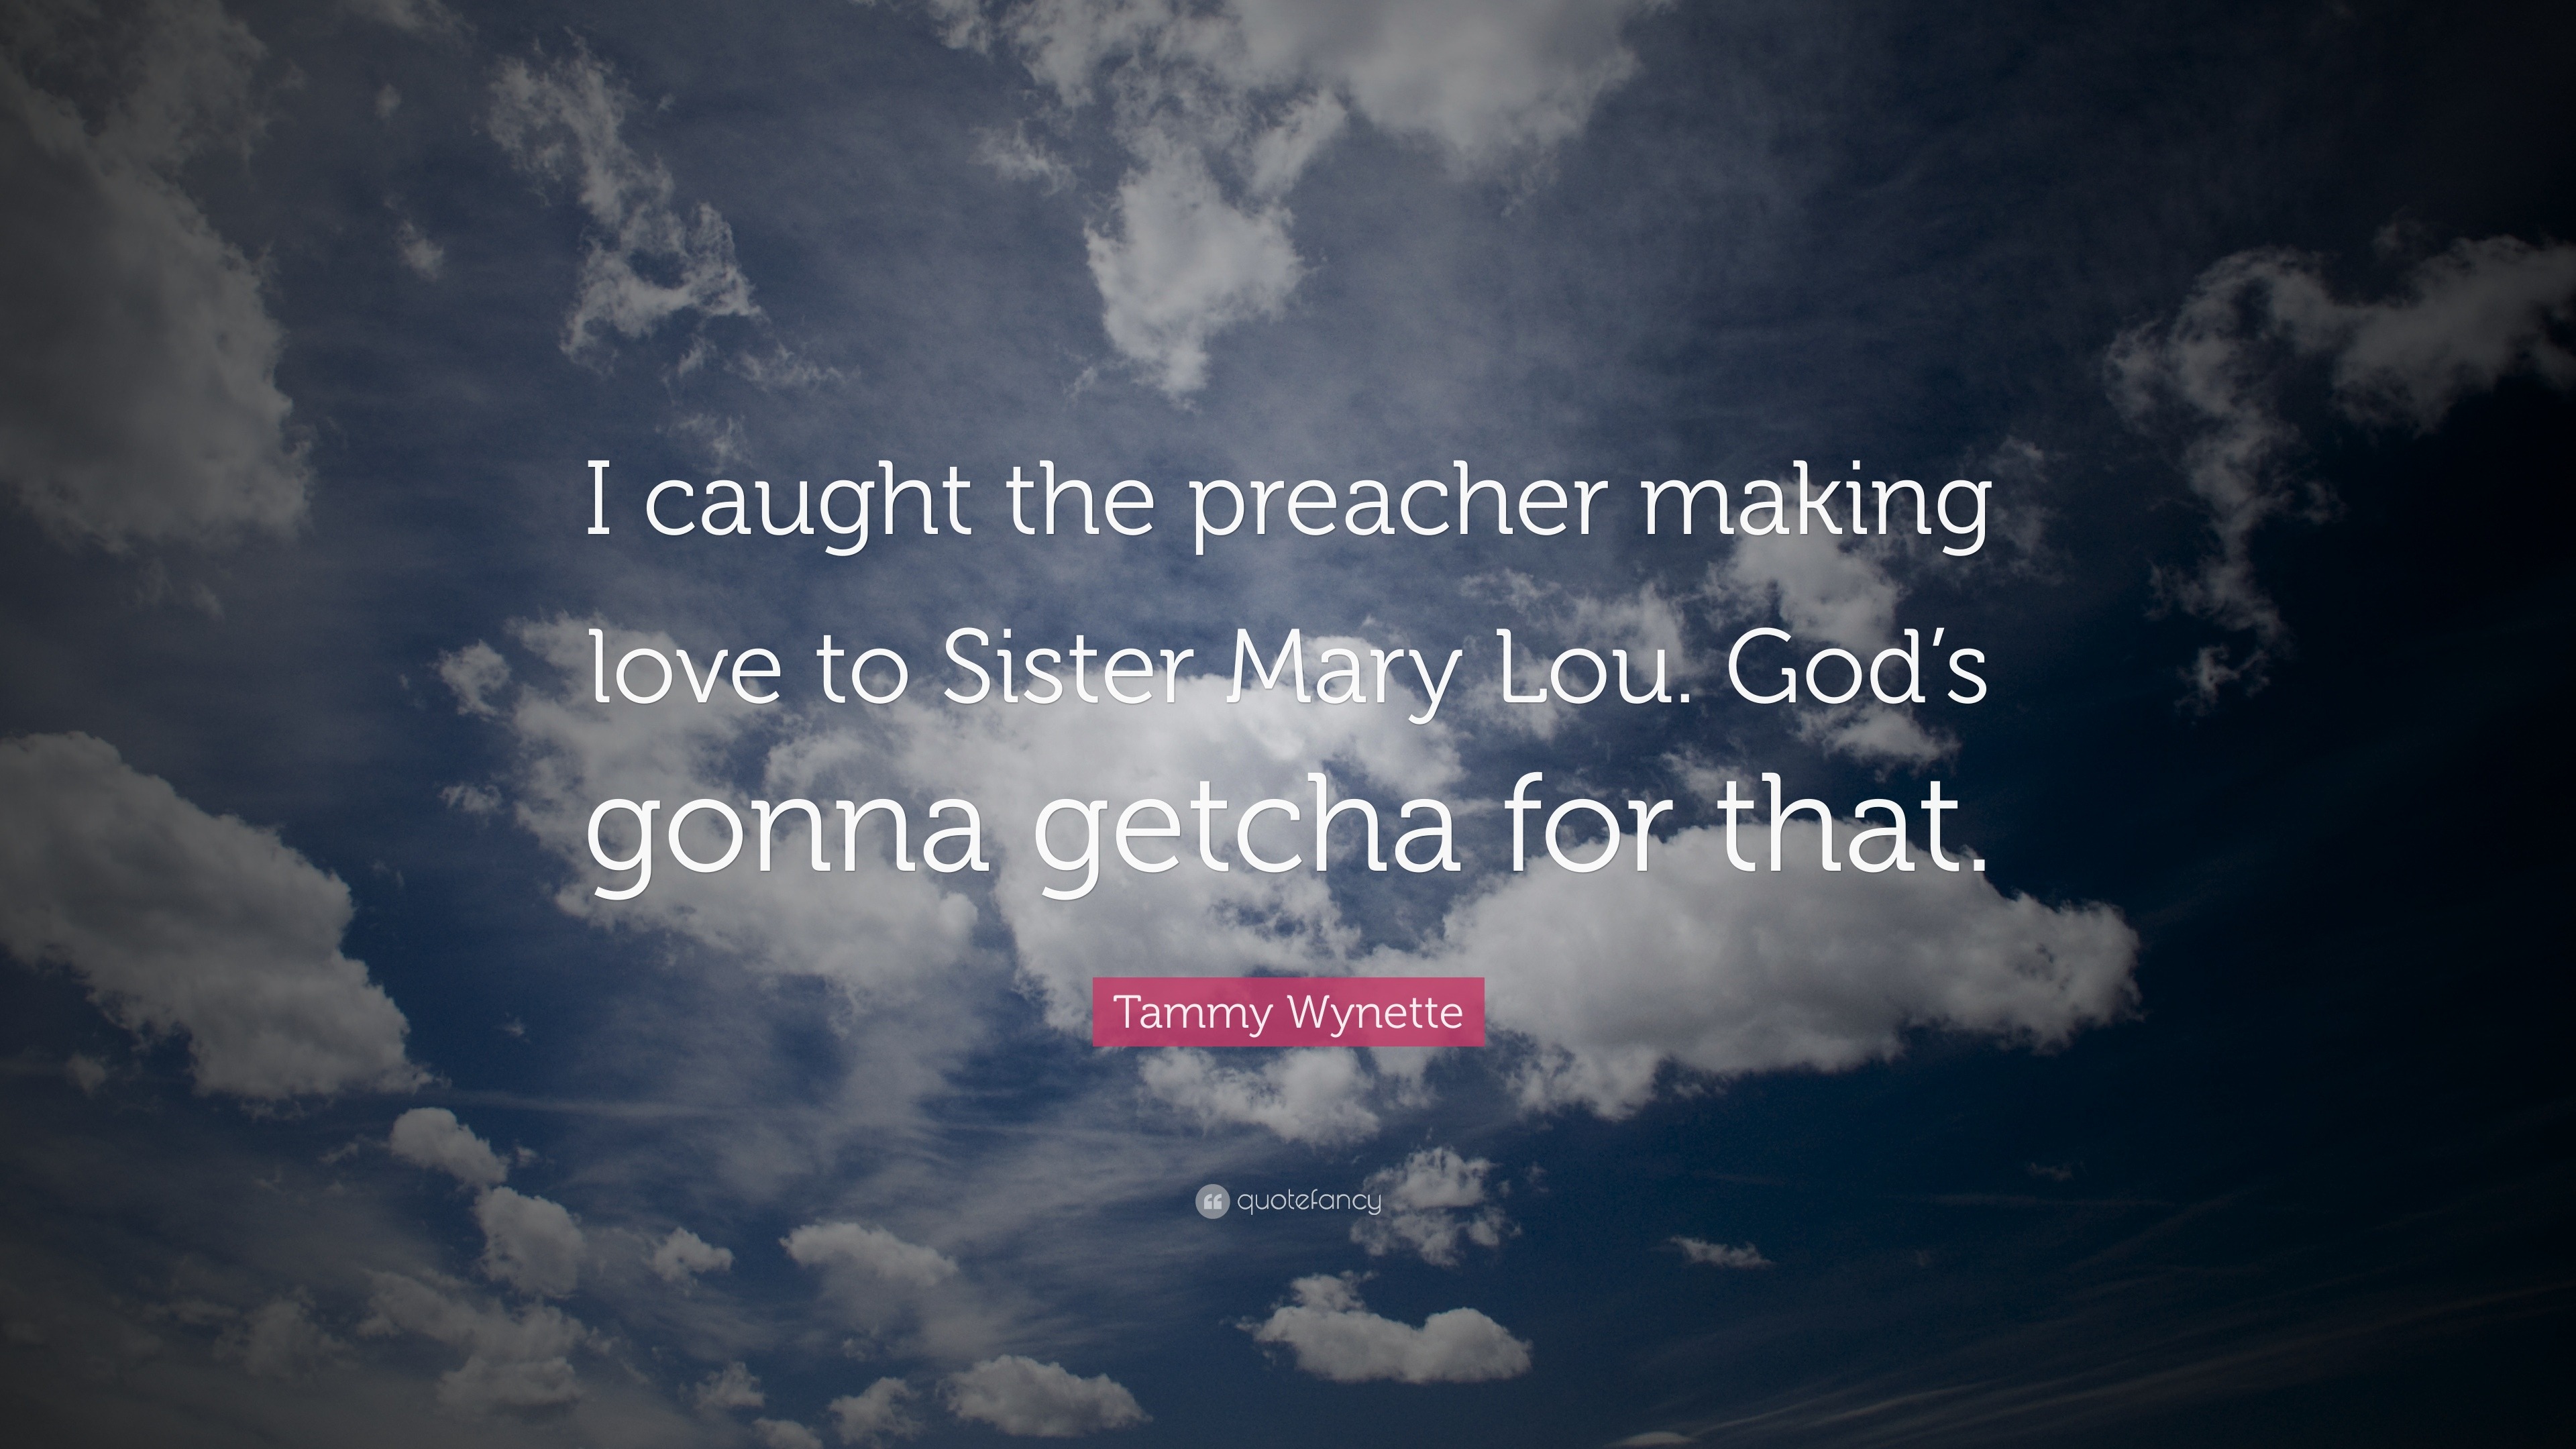 Tammy Wynette Quote “I caught the preacher making love to Sister Mary Lou